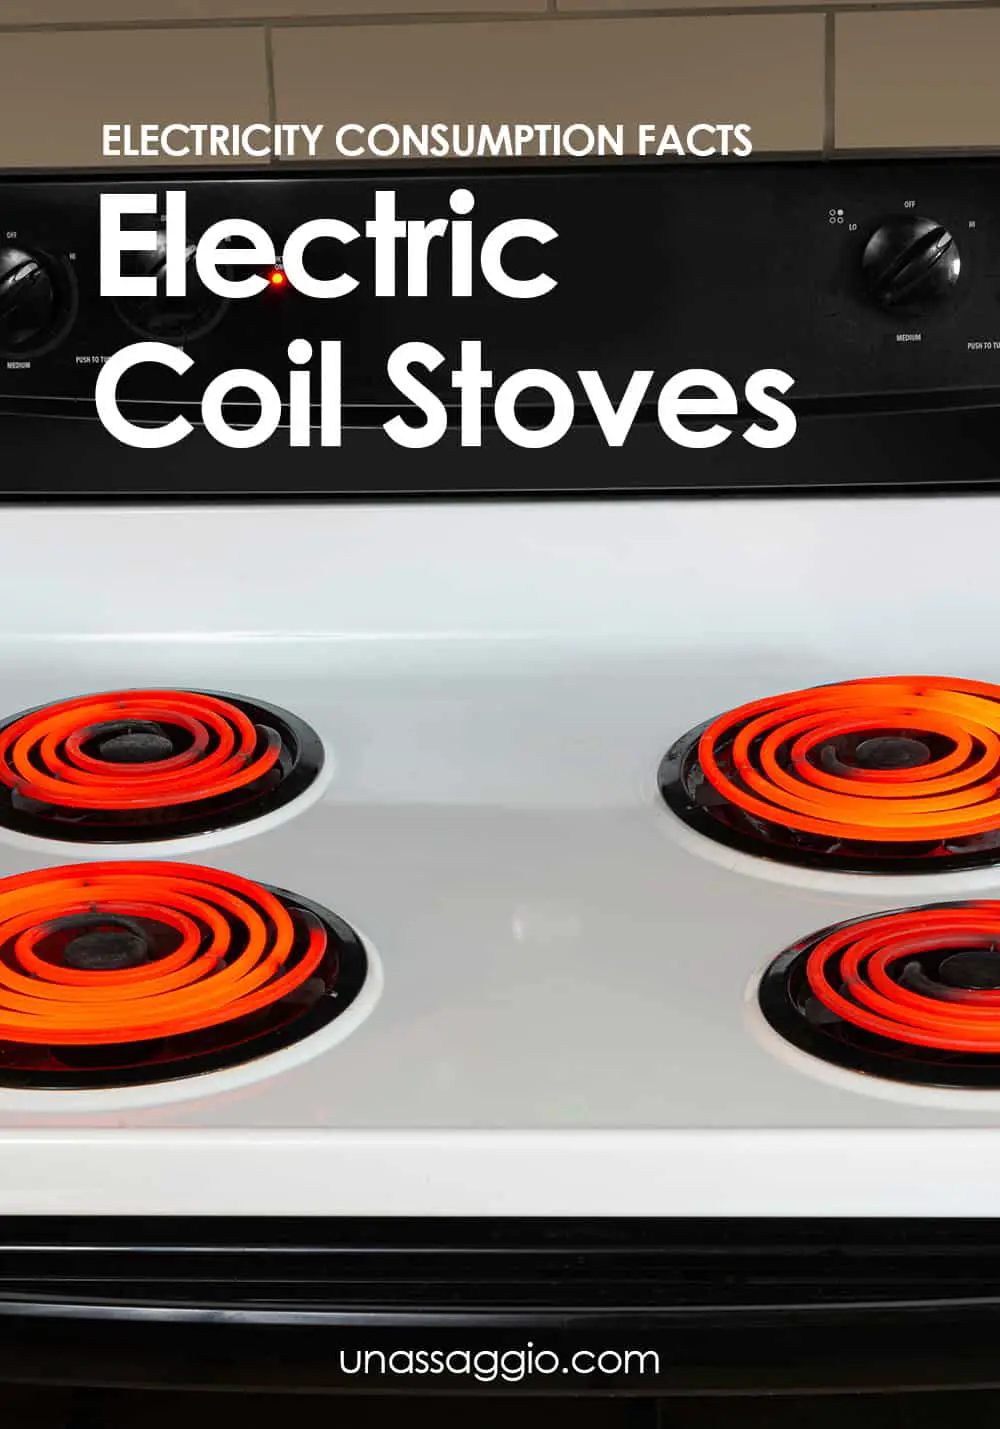 Electric Coil Stoves: Electricity Consumption Facts